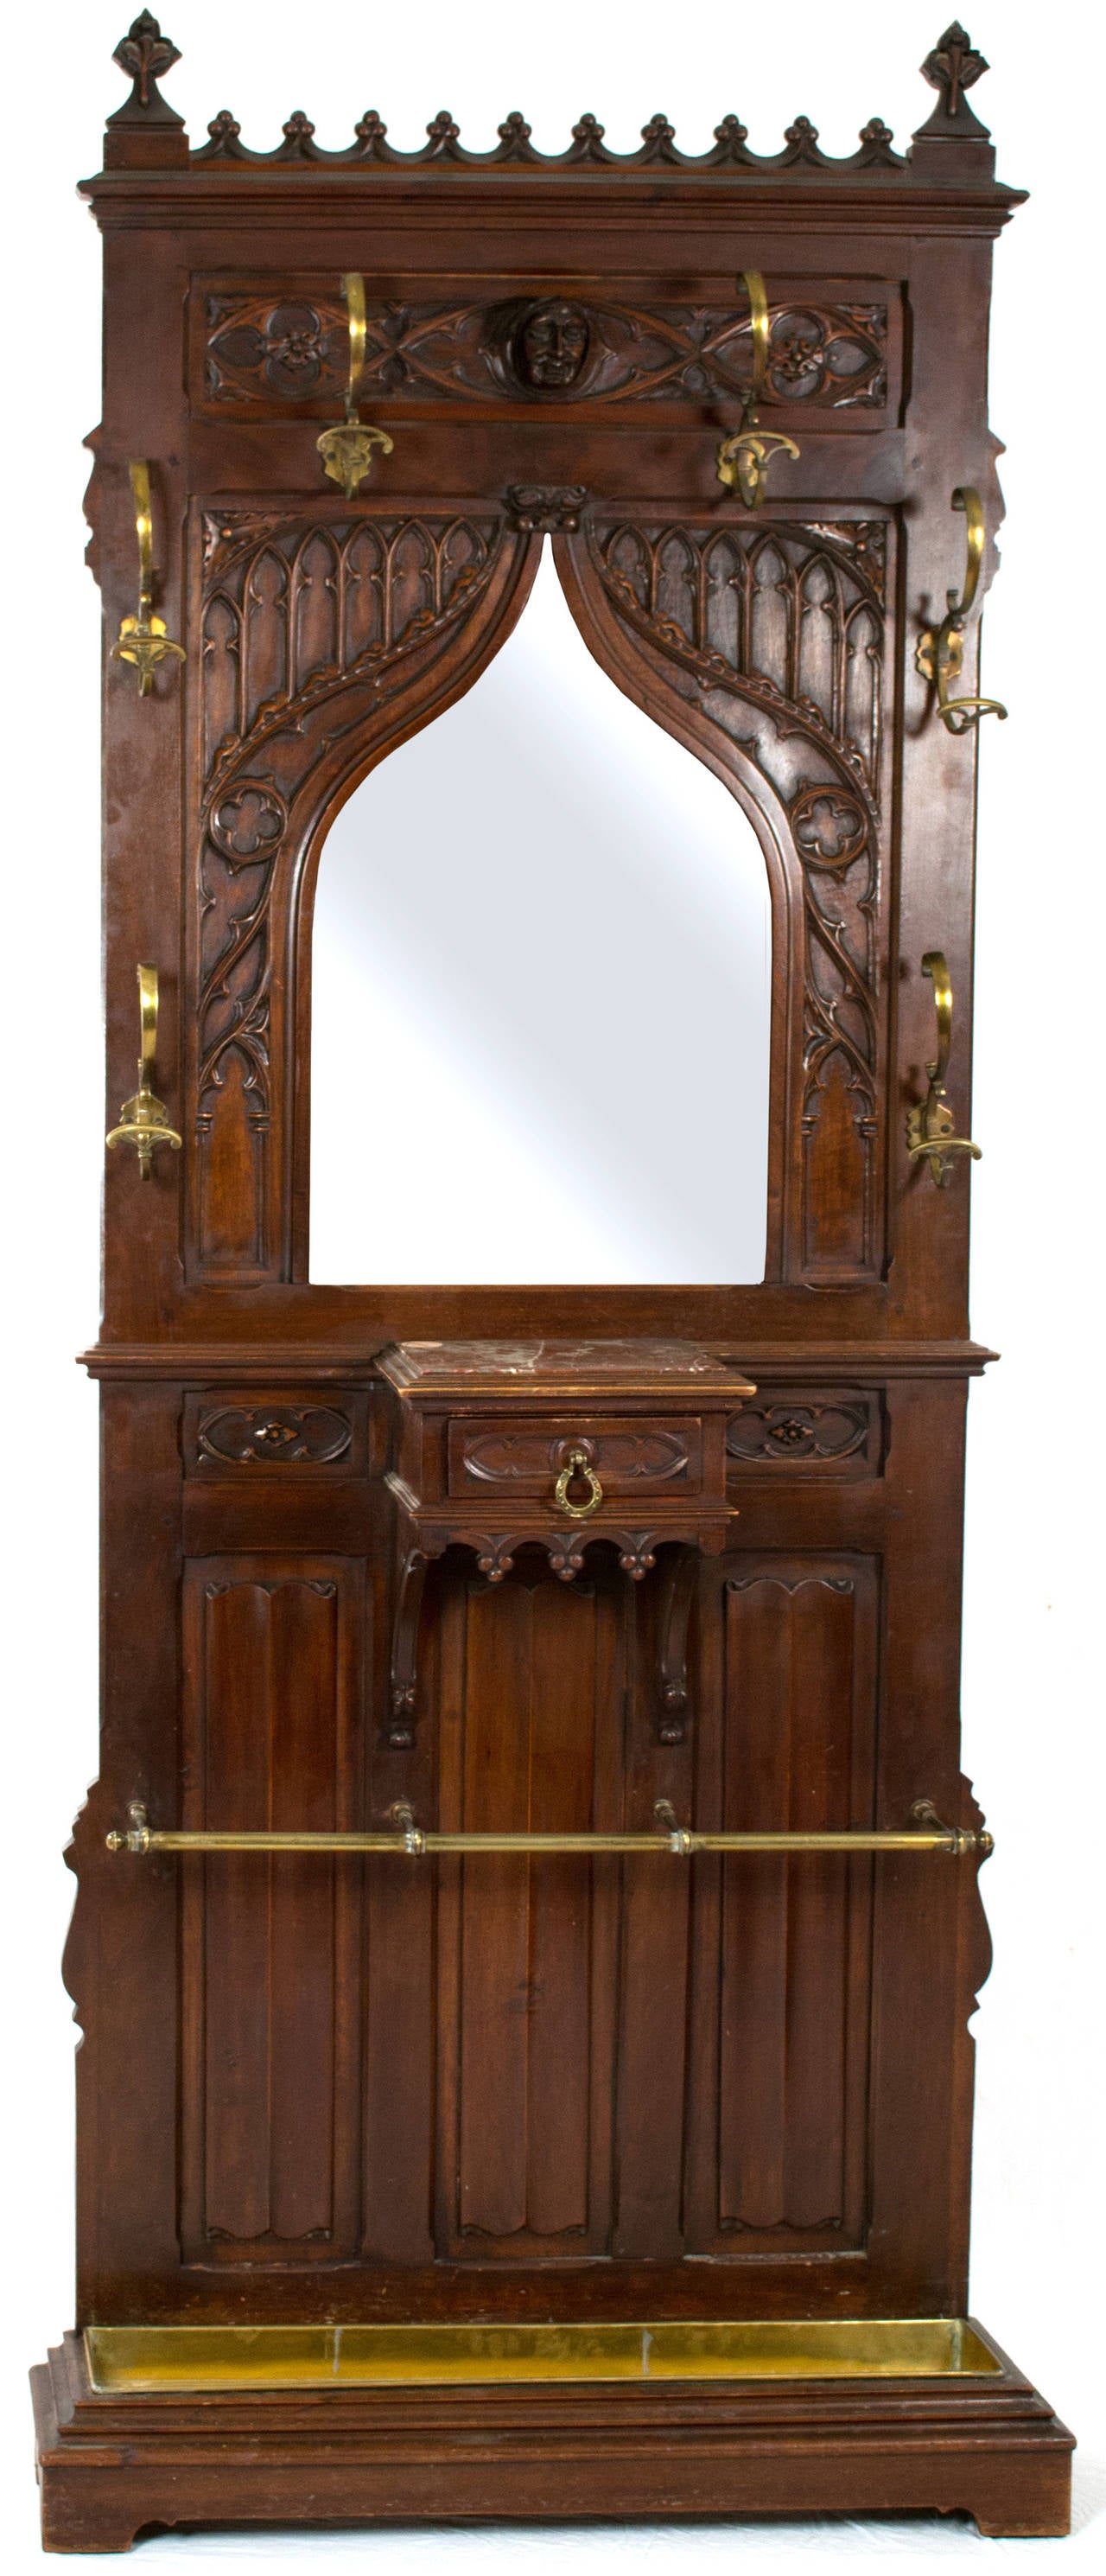 A very fine walnut hall tree with carved linen-fold paneling, ogee arches, trefoils, leaves, and — surmounting the bevelled mirror — a mask of the Green Man. The hall tree features six elaborate and beautiful brass s-shaped hooks, a brass bar and